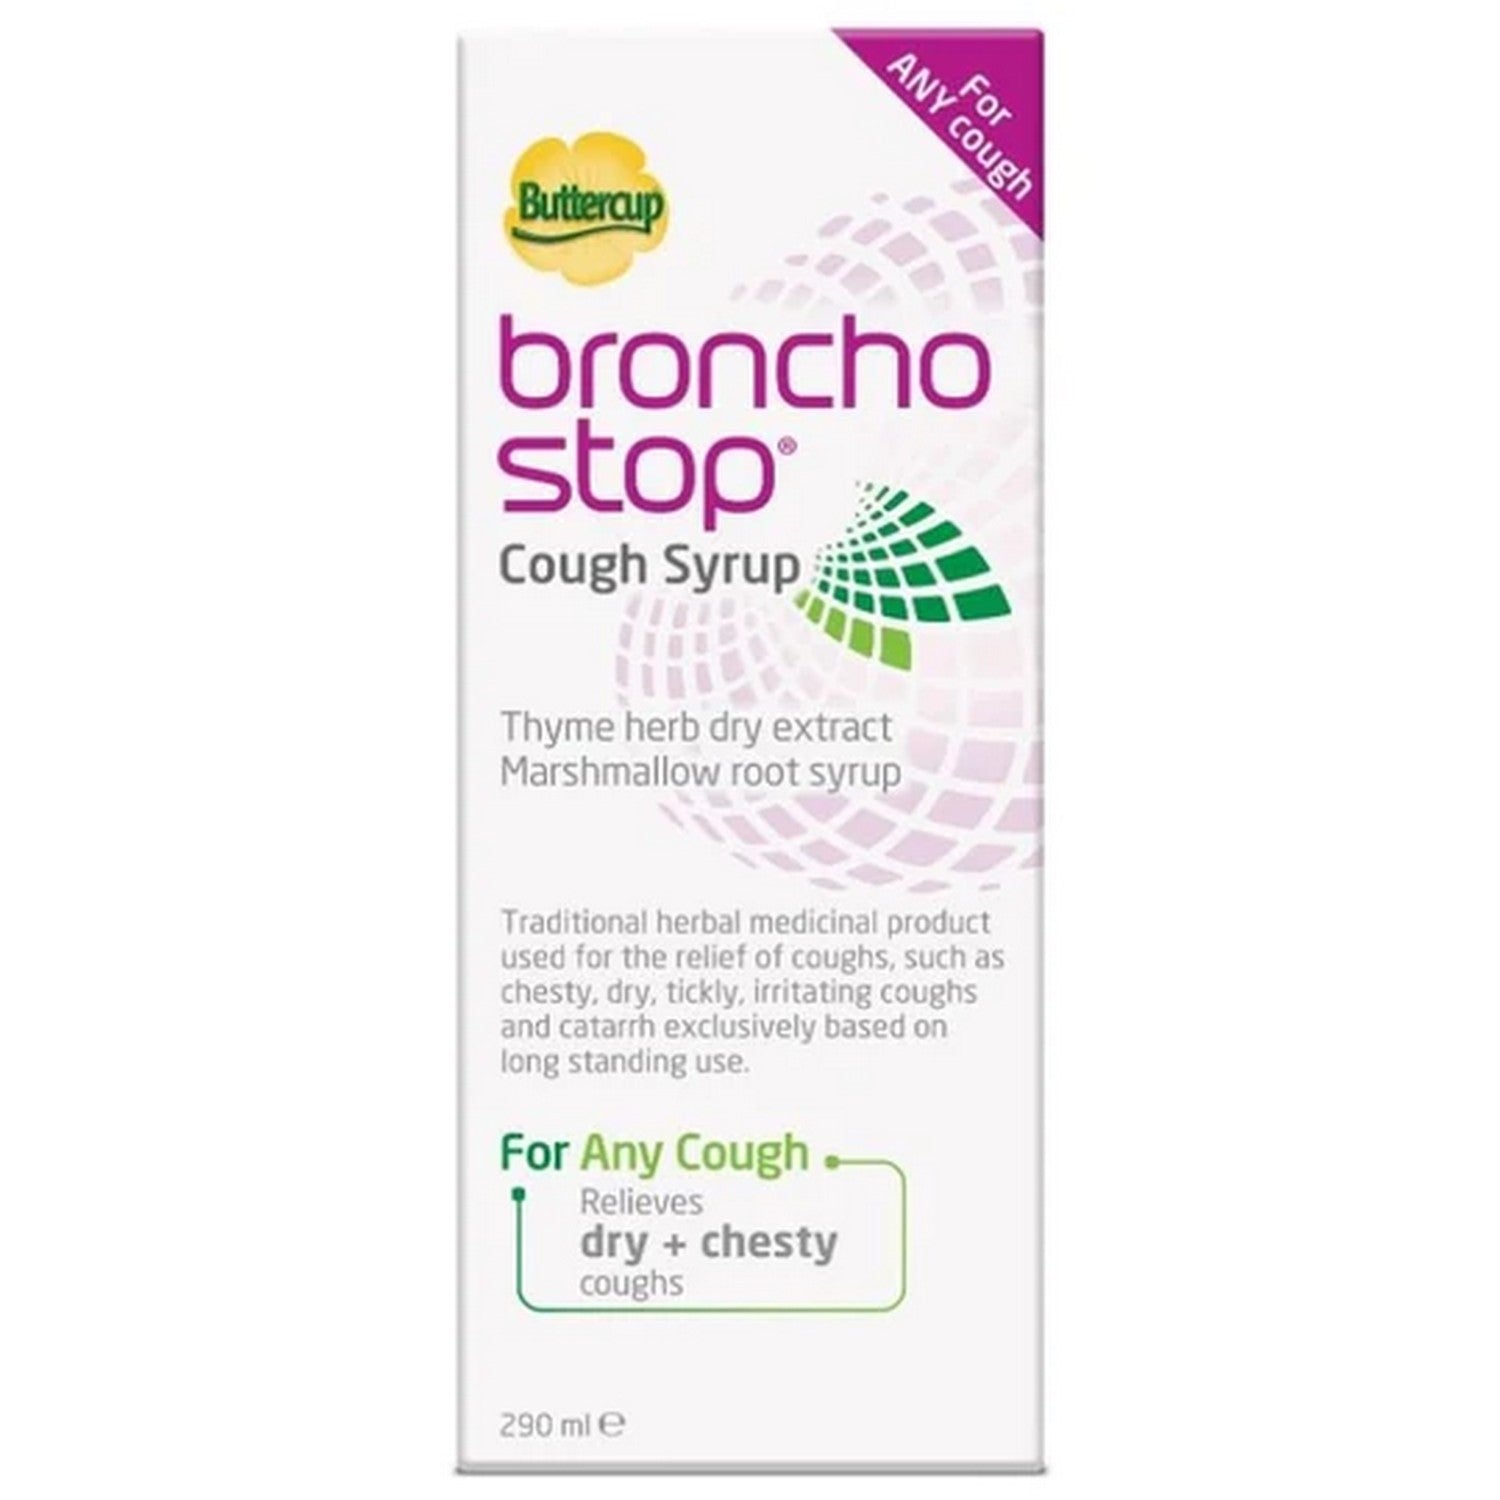 Bronchostop Cough Syrup - Used to Relieve Any Type of Cough - 290 ml